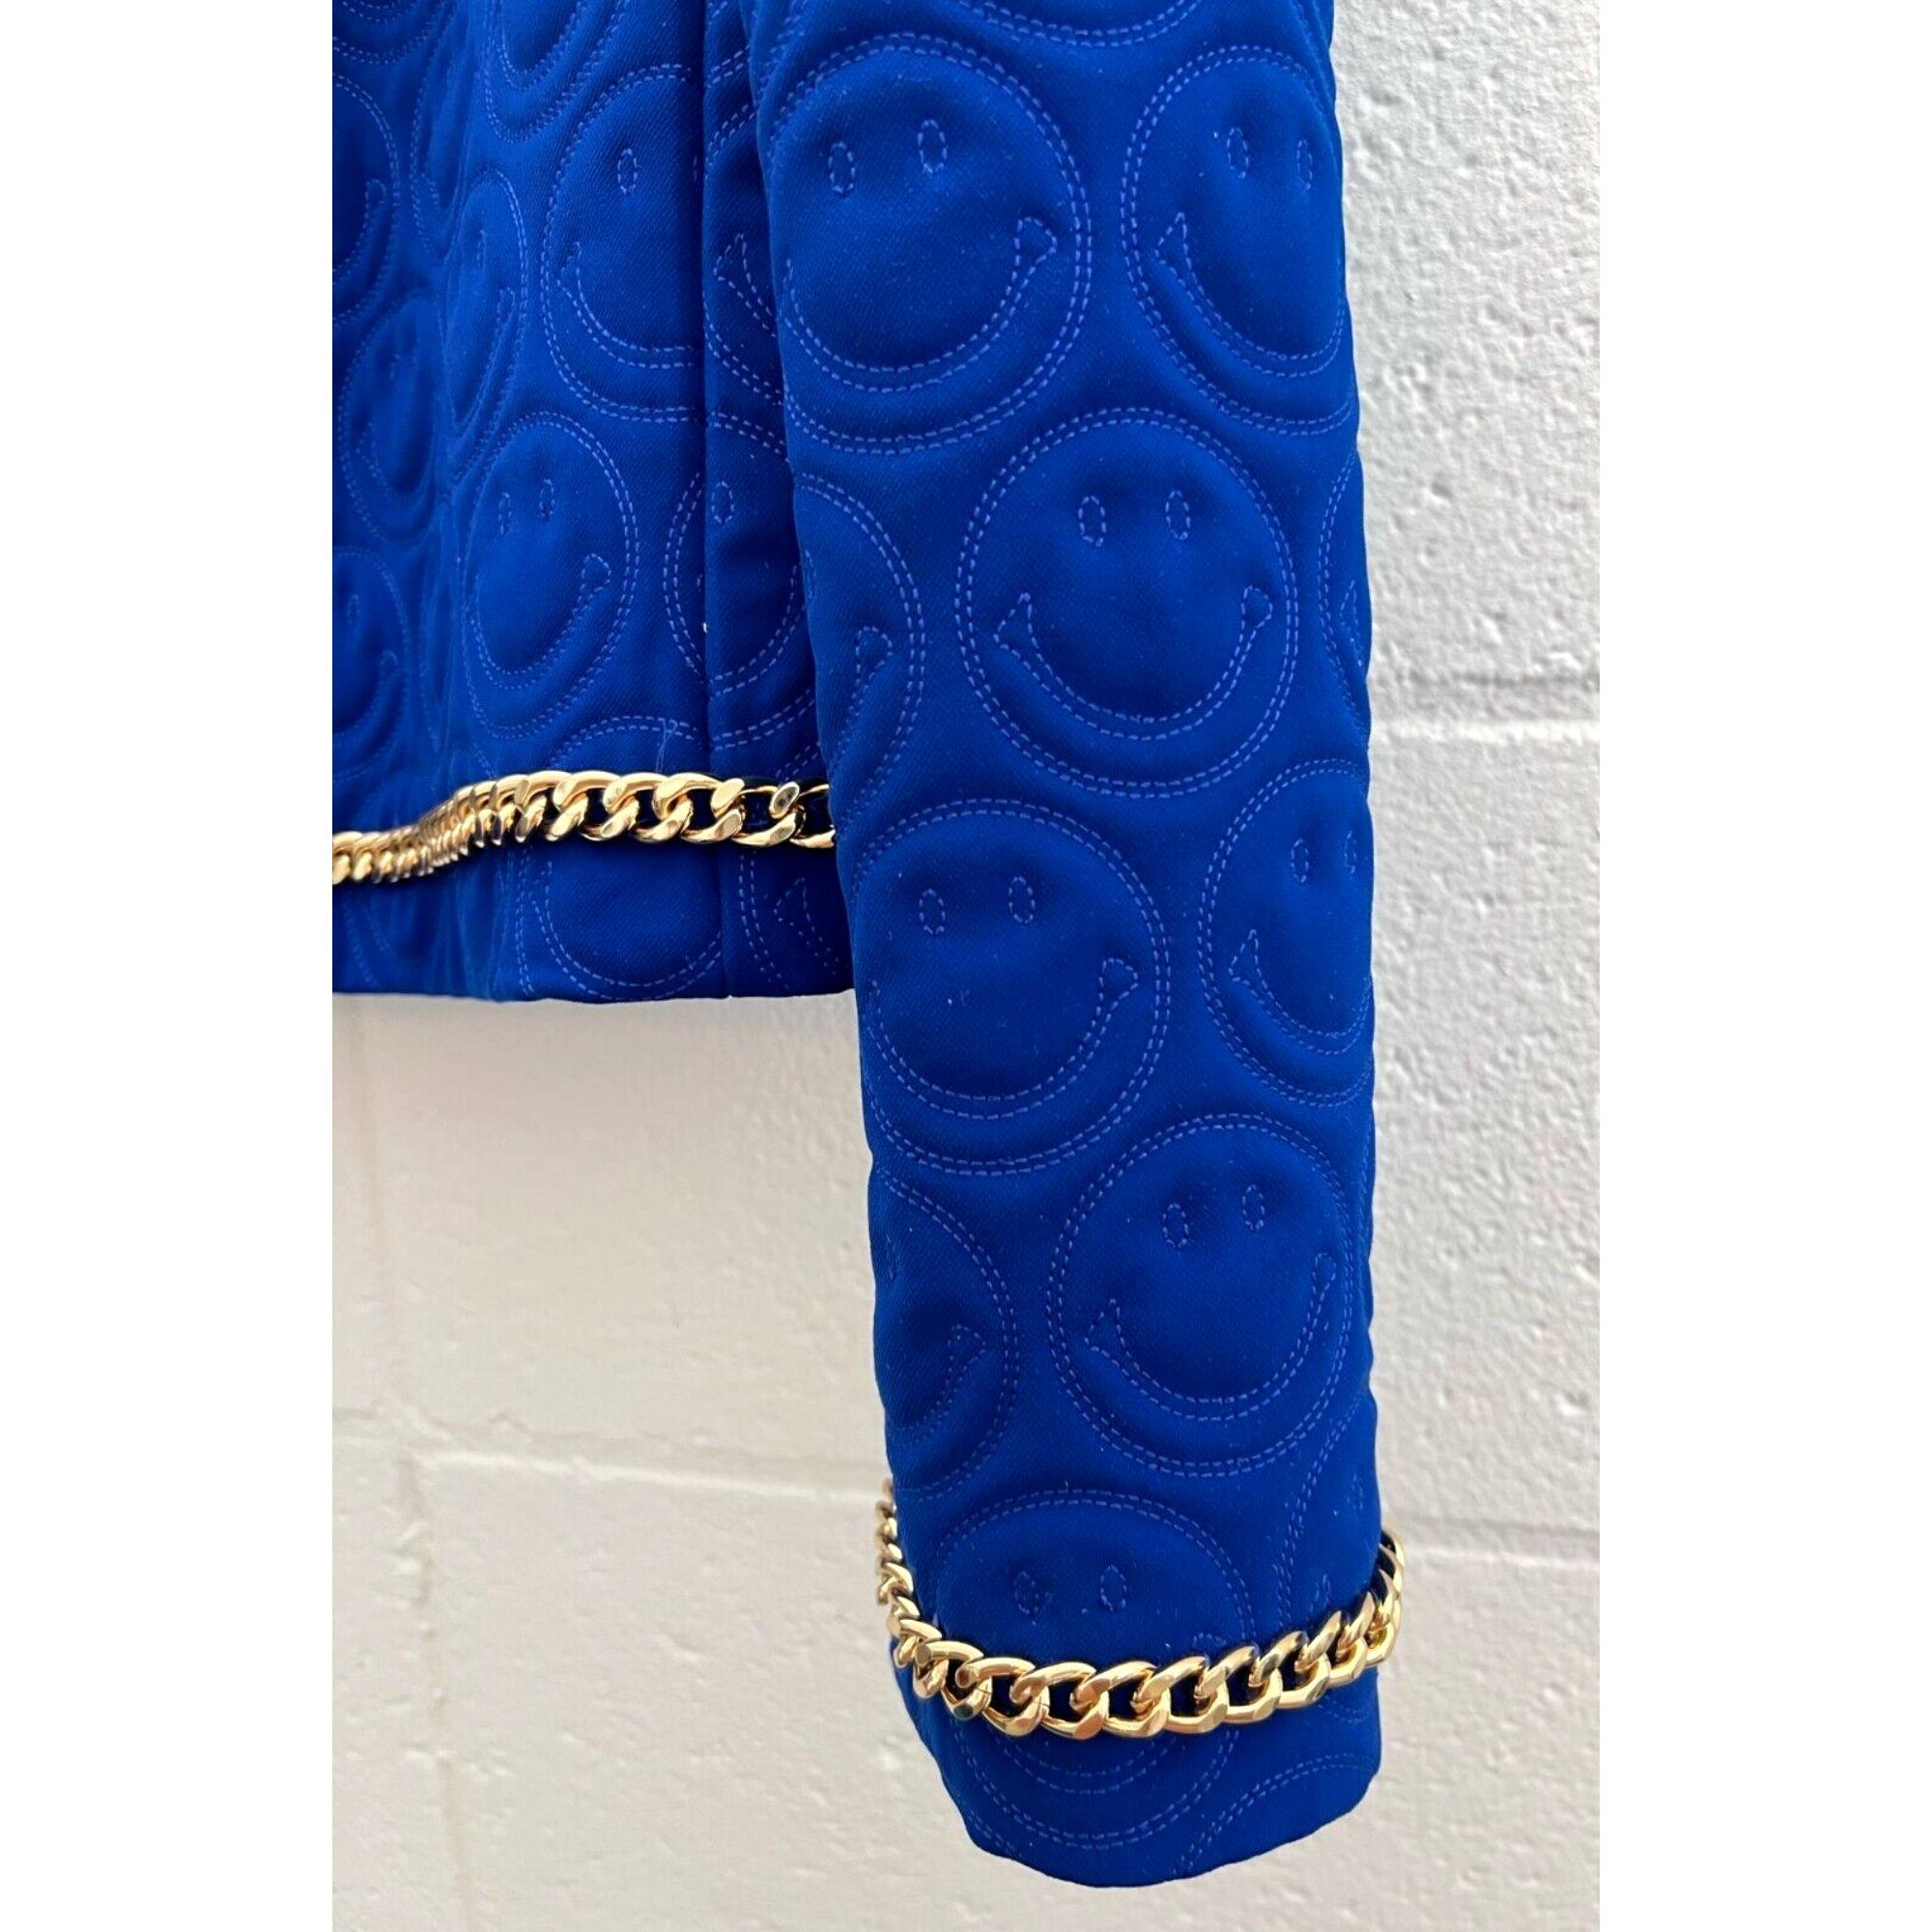 SS21 Moschino Couture BlueBlazer Smiley Face by Jeremy Scott, Size US 12 In New Condition For Sale In Palm Springs, CA